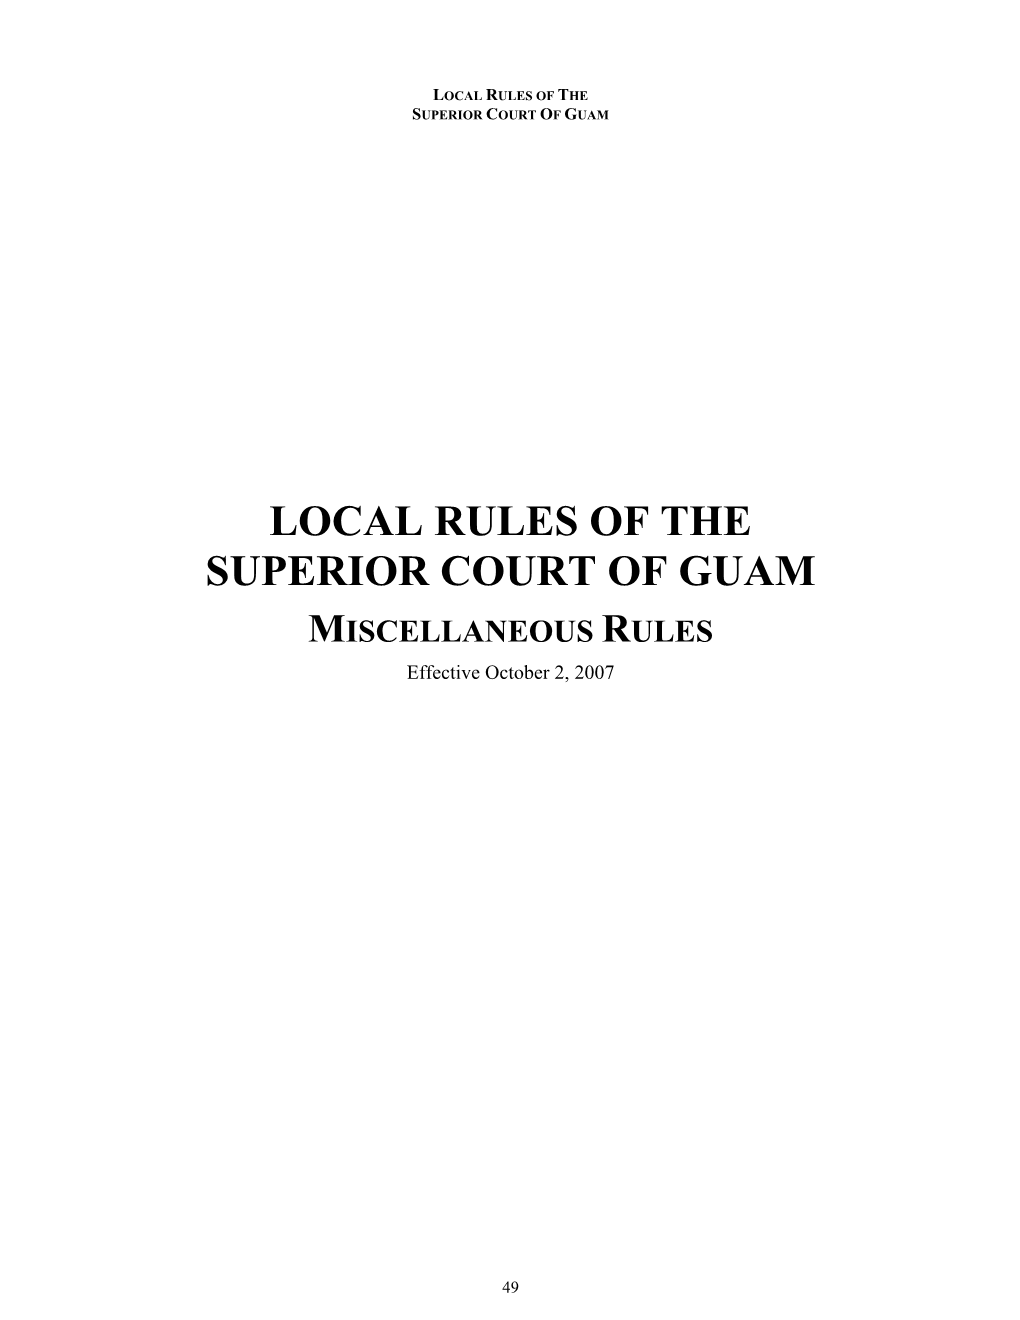 Local Rules of the Superior Court of Guam